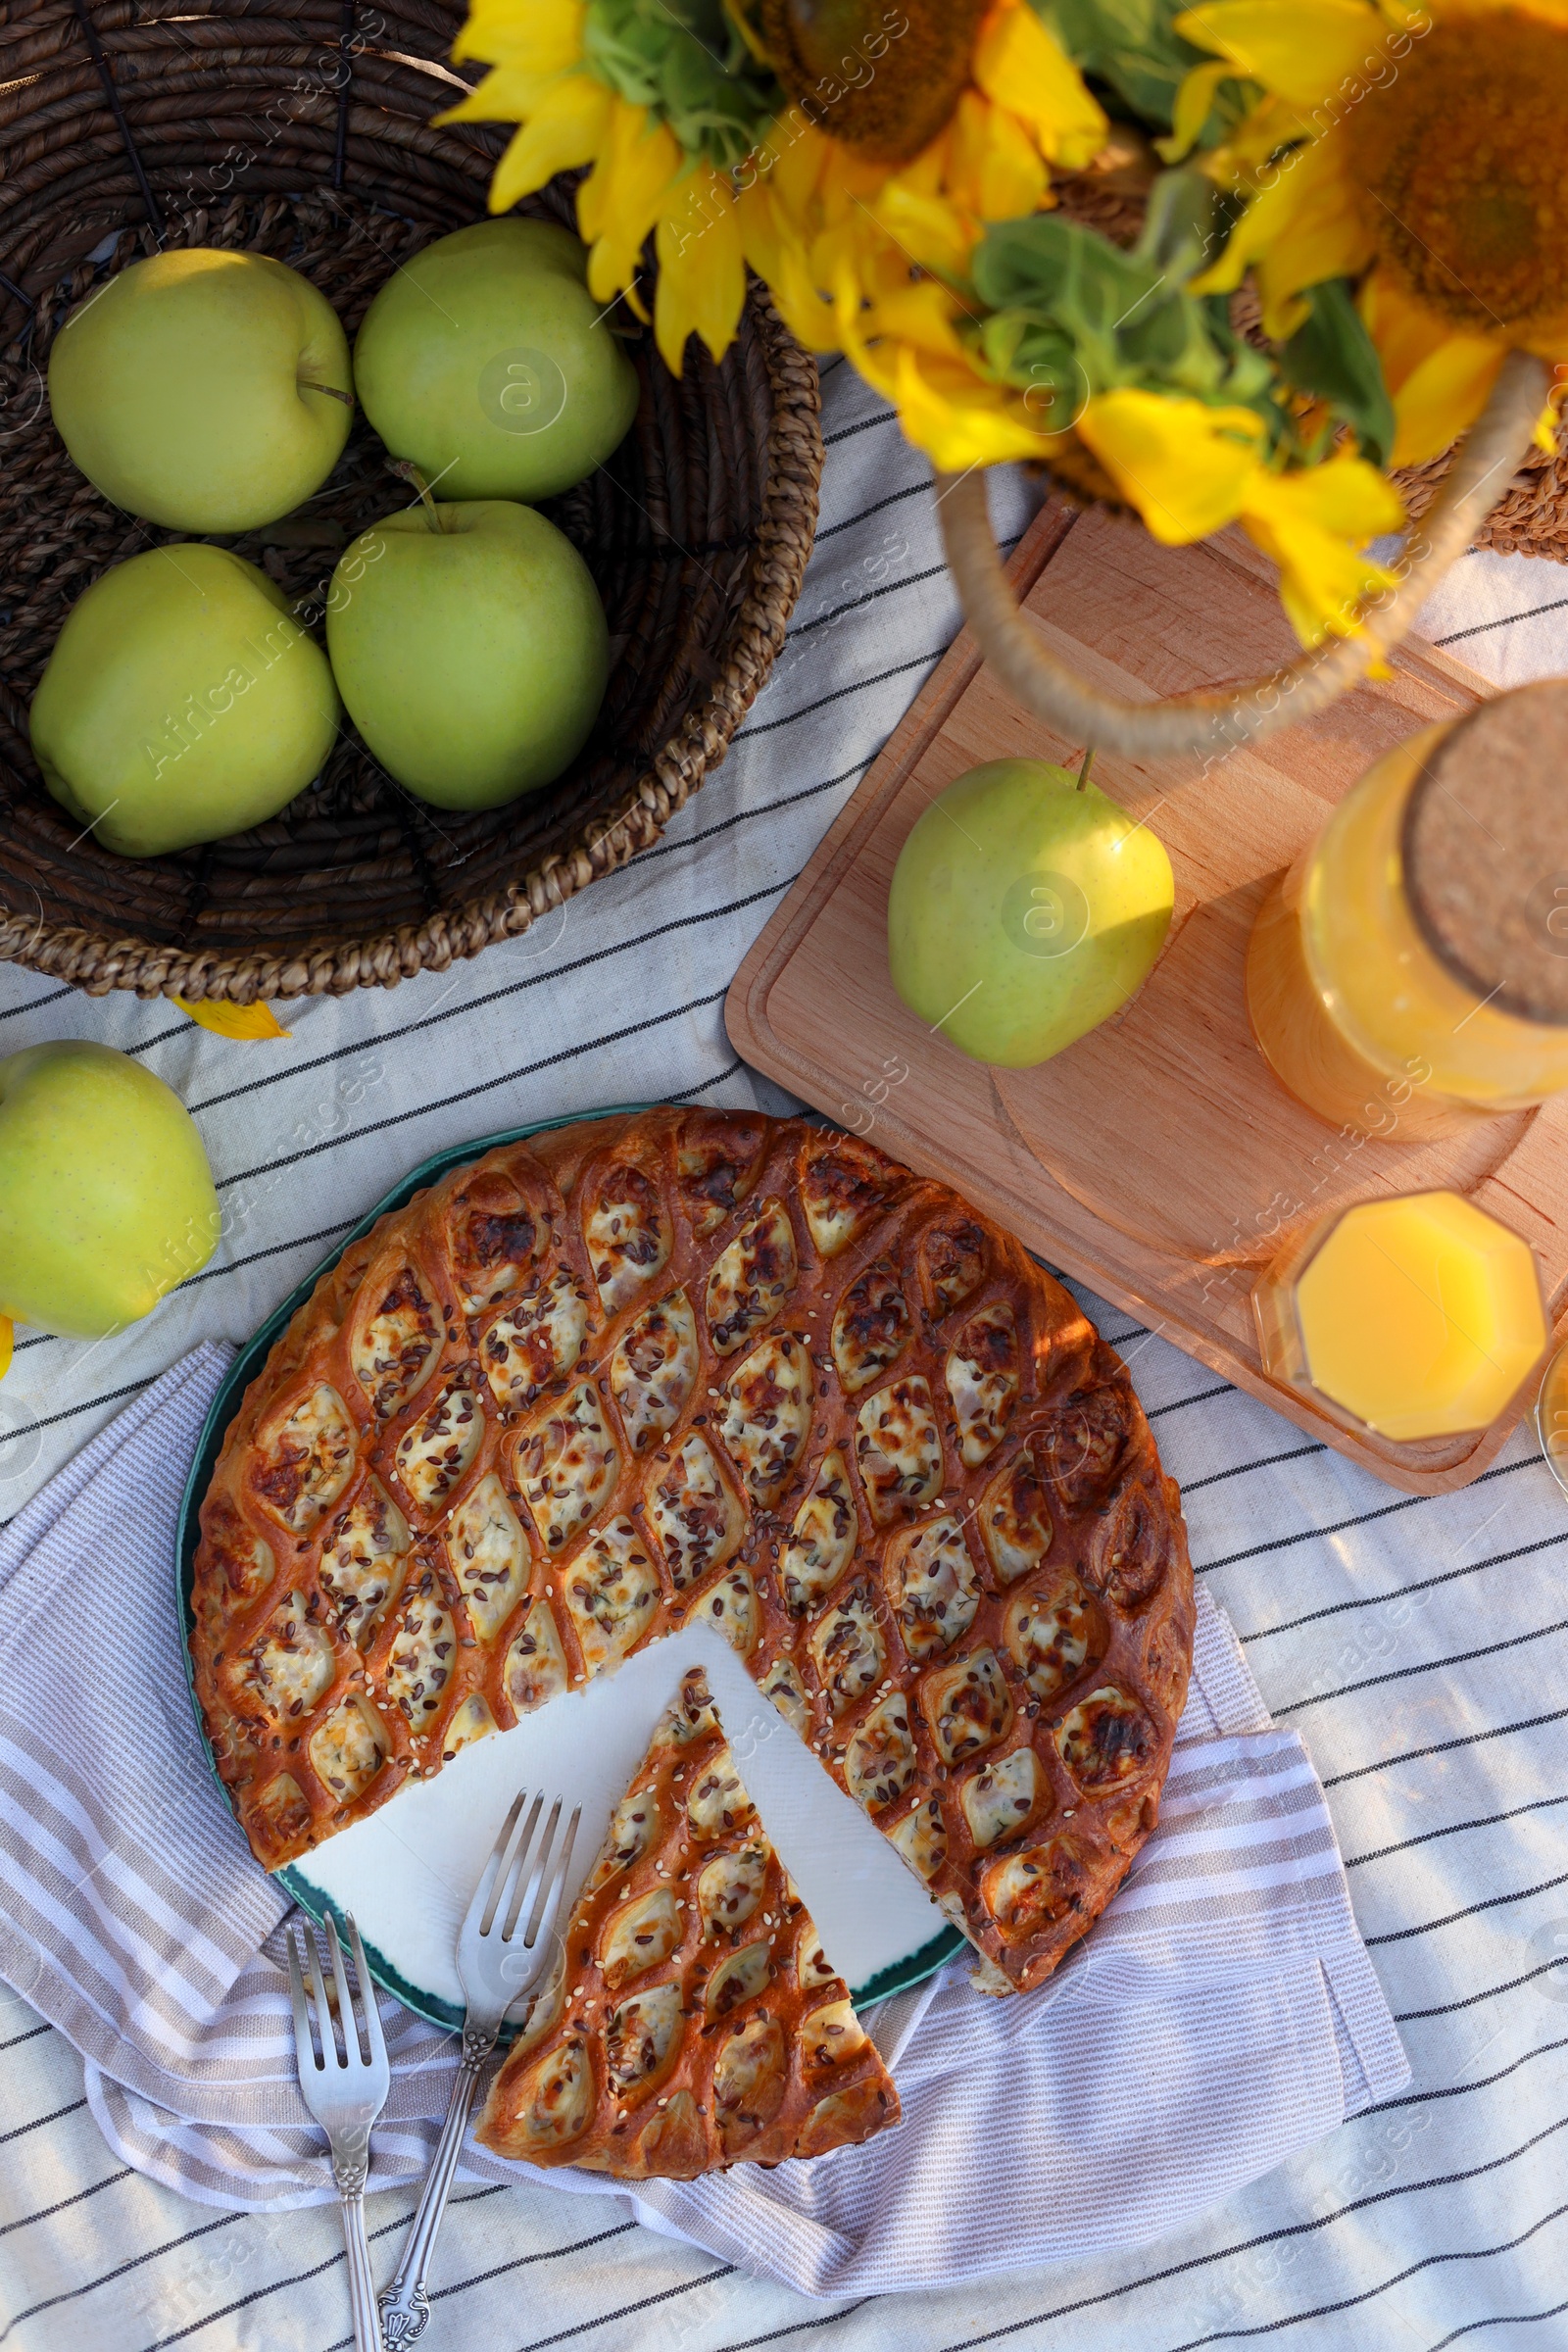 Photo of Delicious pie, apples and juice on striped blanket outdoors, flat lay. Picnic season